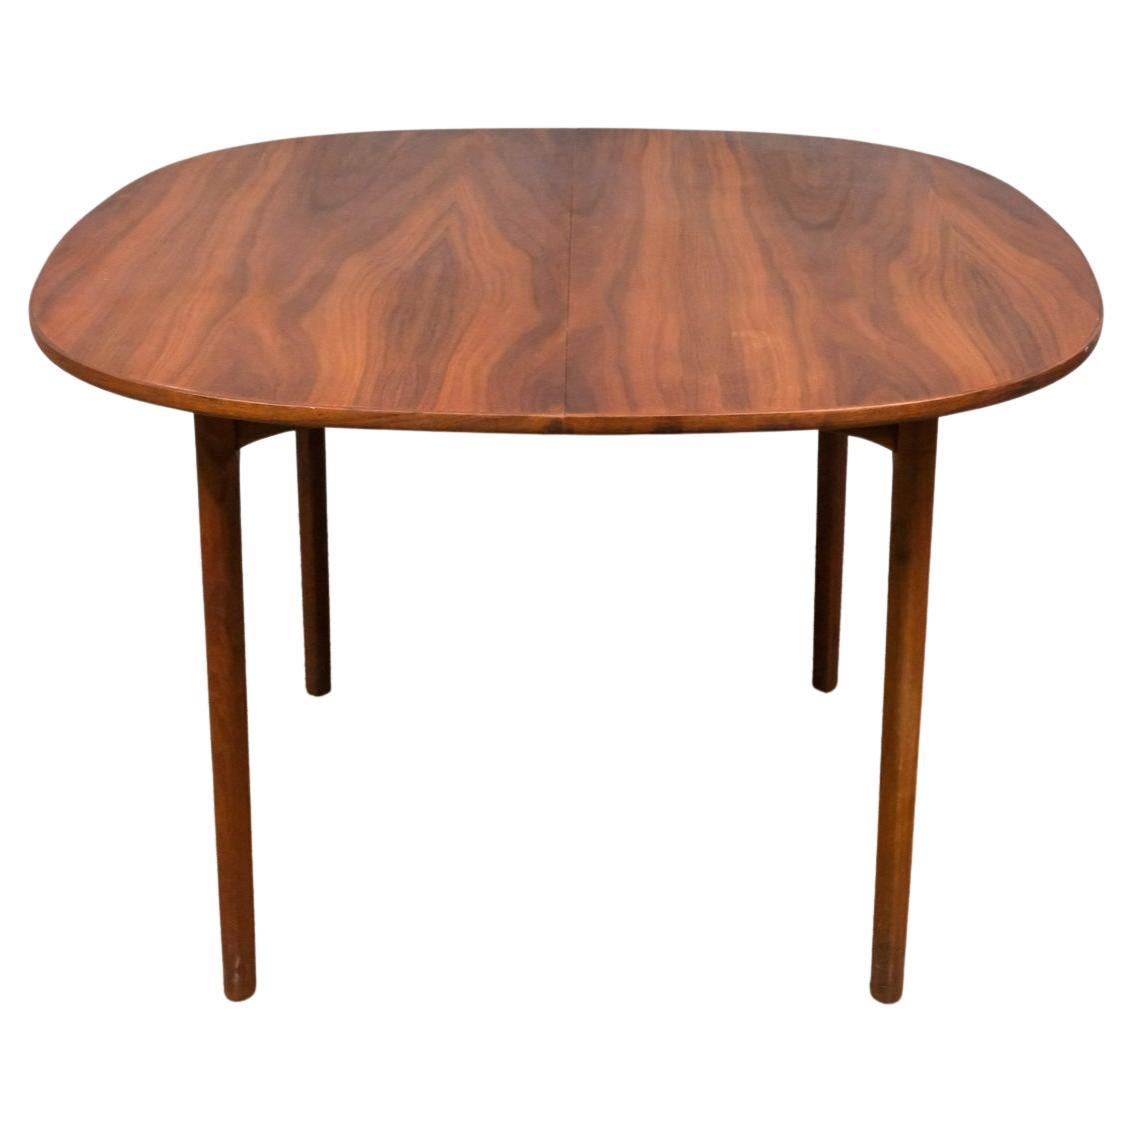 Danish Stunning Mid century modern danish teak rounded dining table with two leaves For Sale